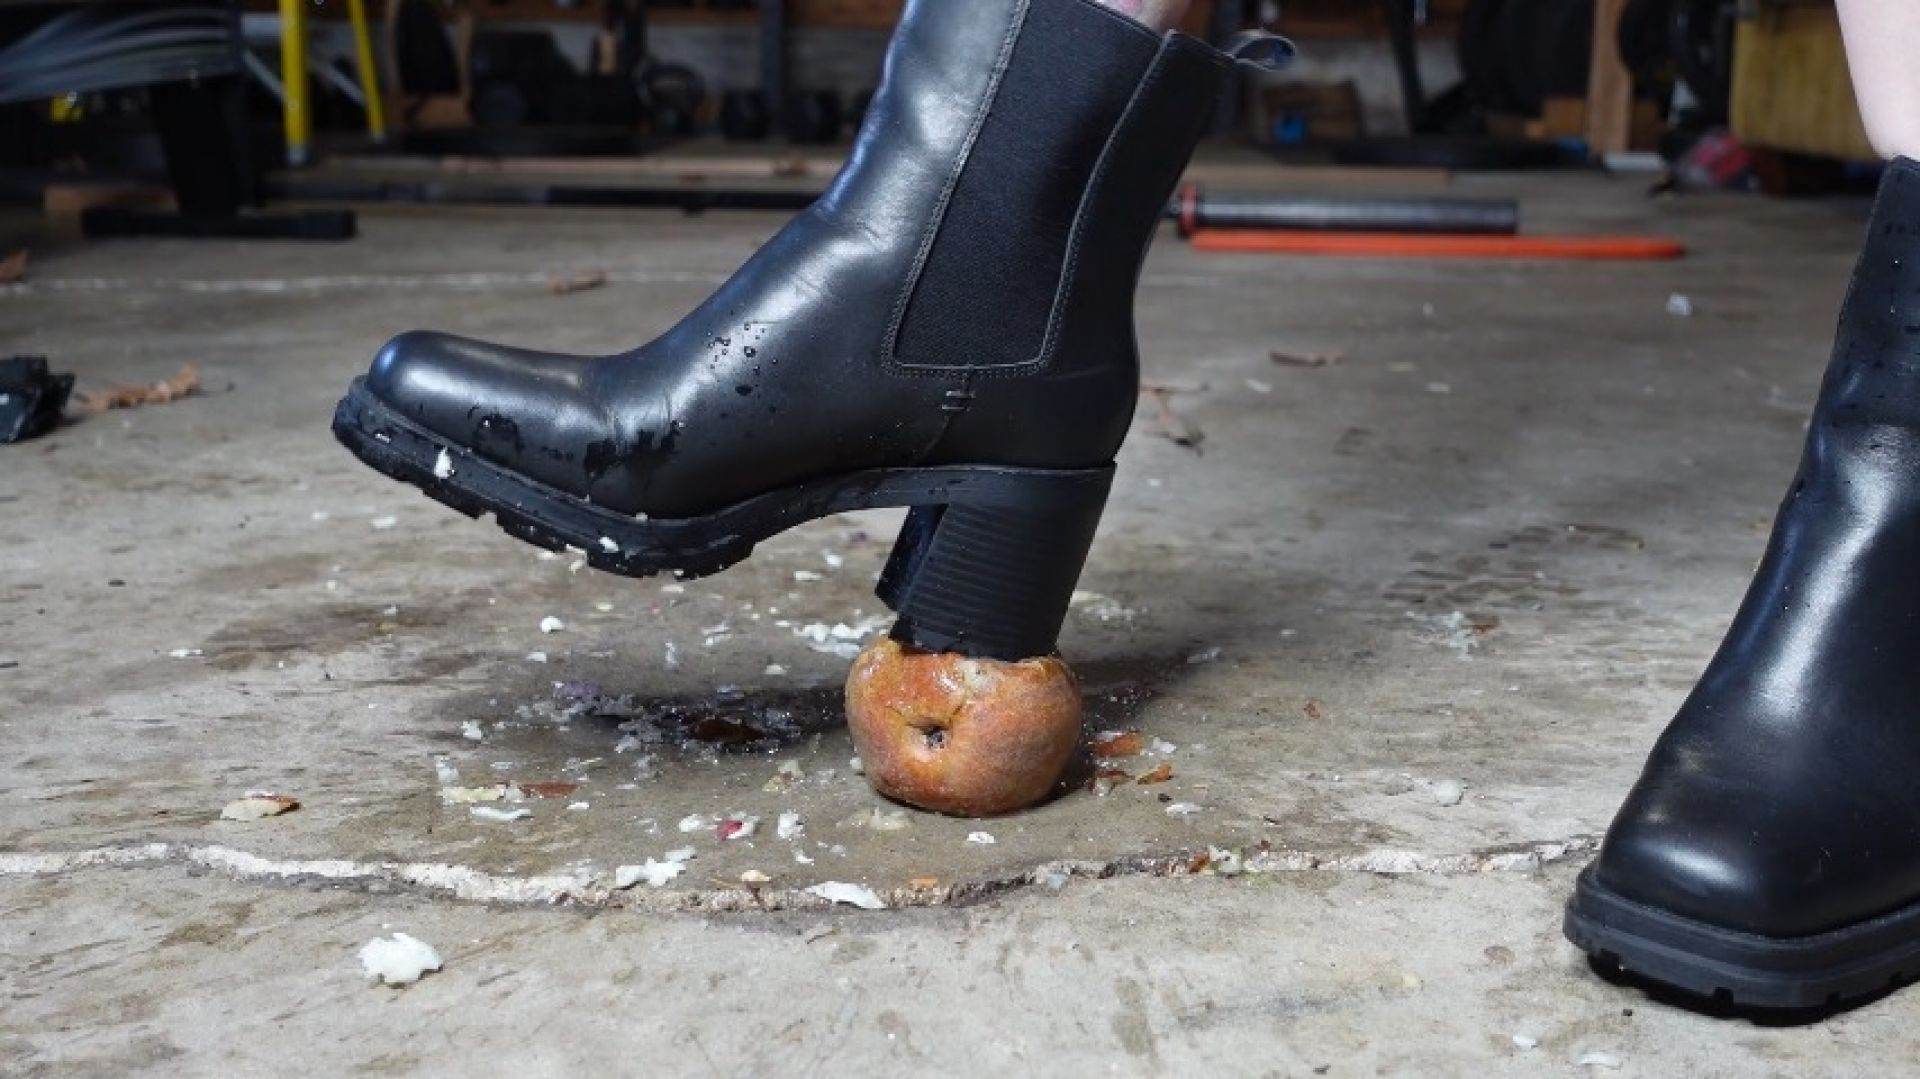 Crushing Fruits and Veggies in Ankle Boots